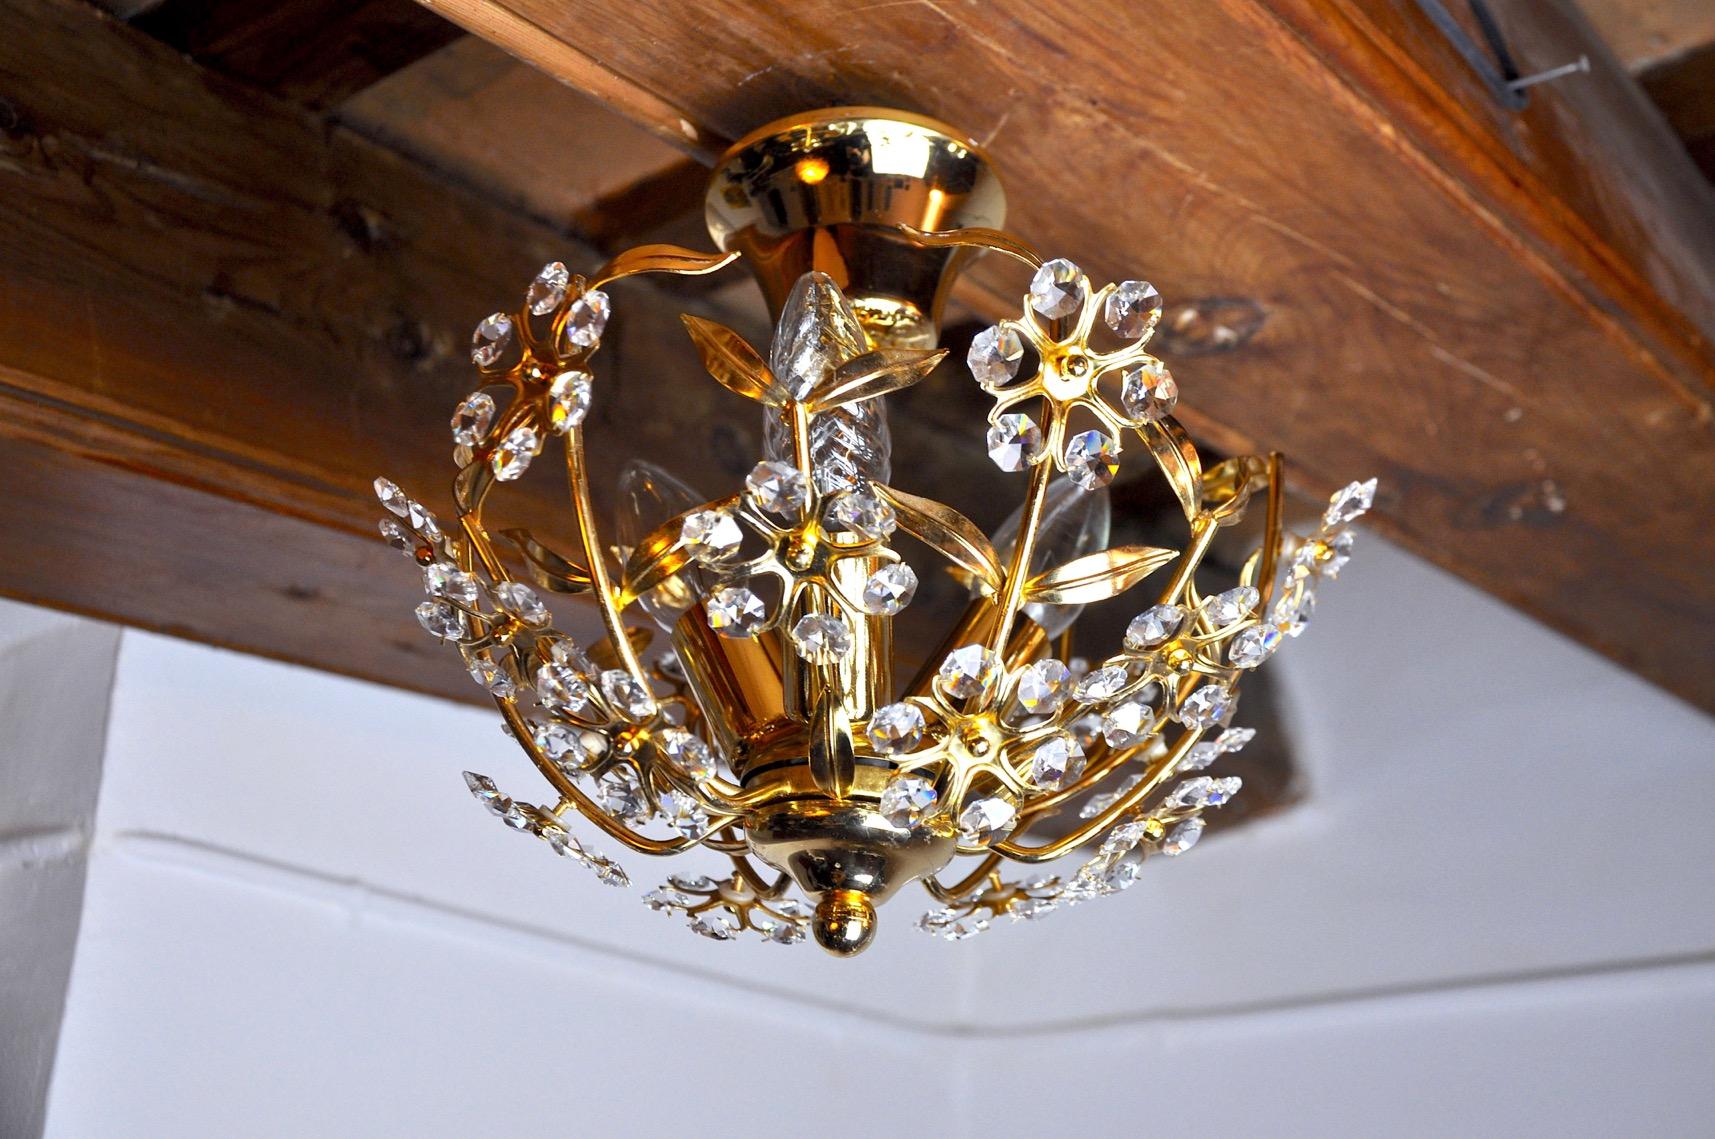 Superb and rare oscar torlasco floral ceiling lamp designed and produced in italy in the 1980s. This unique object is composed of cut crystals and a golden structure. Object that will illuminate wonderfully and bring a real design touch to your